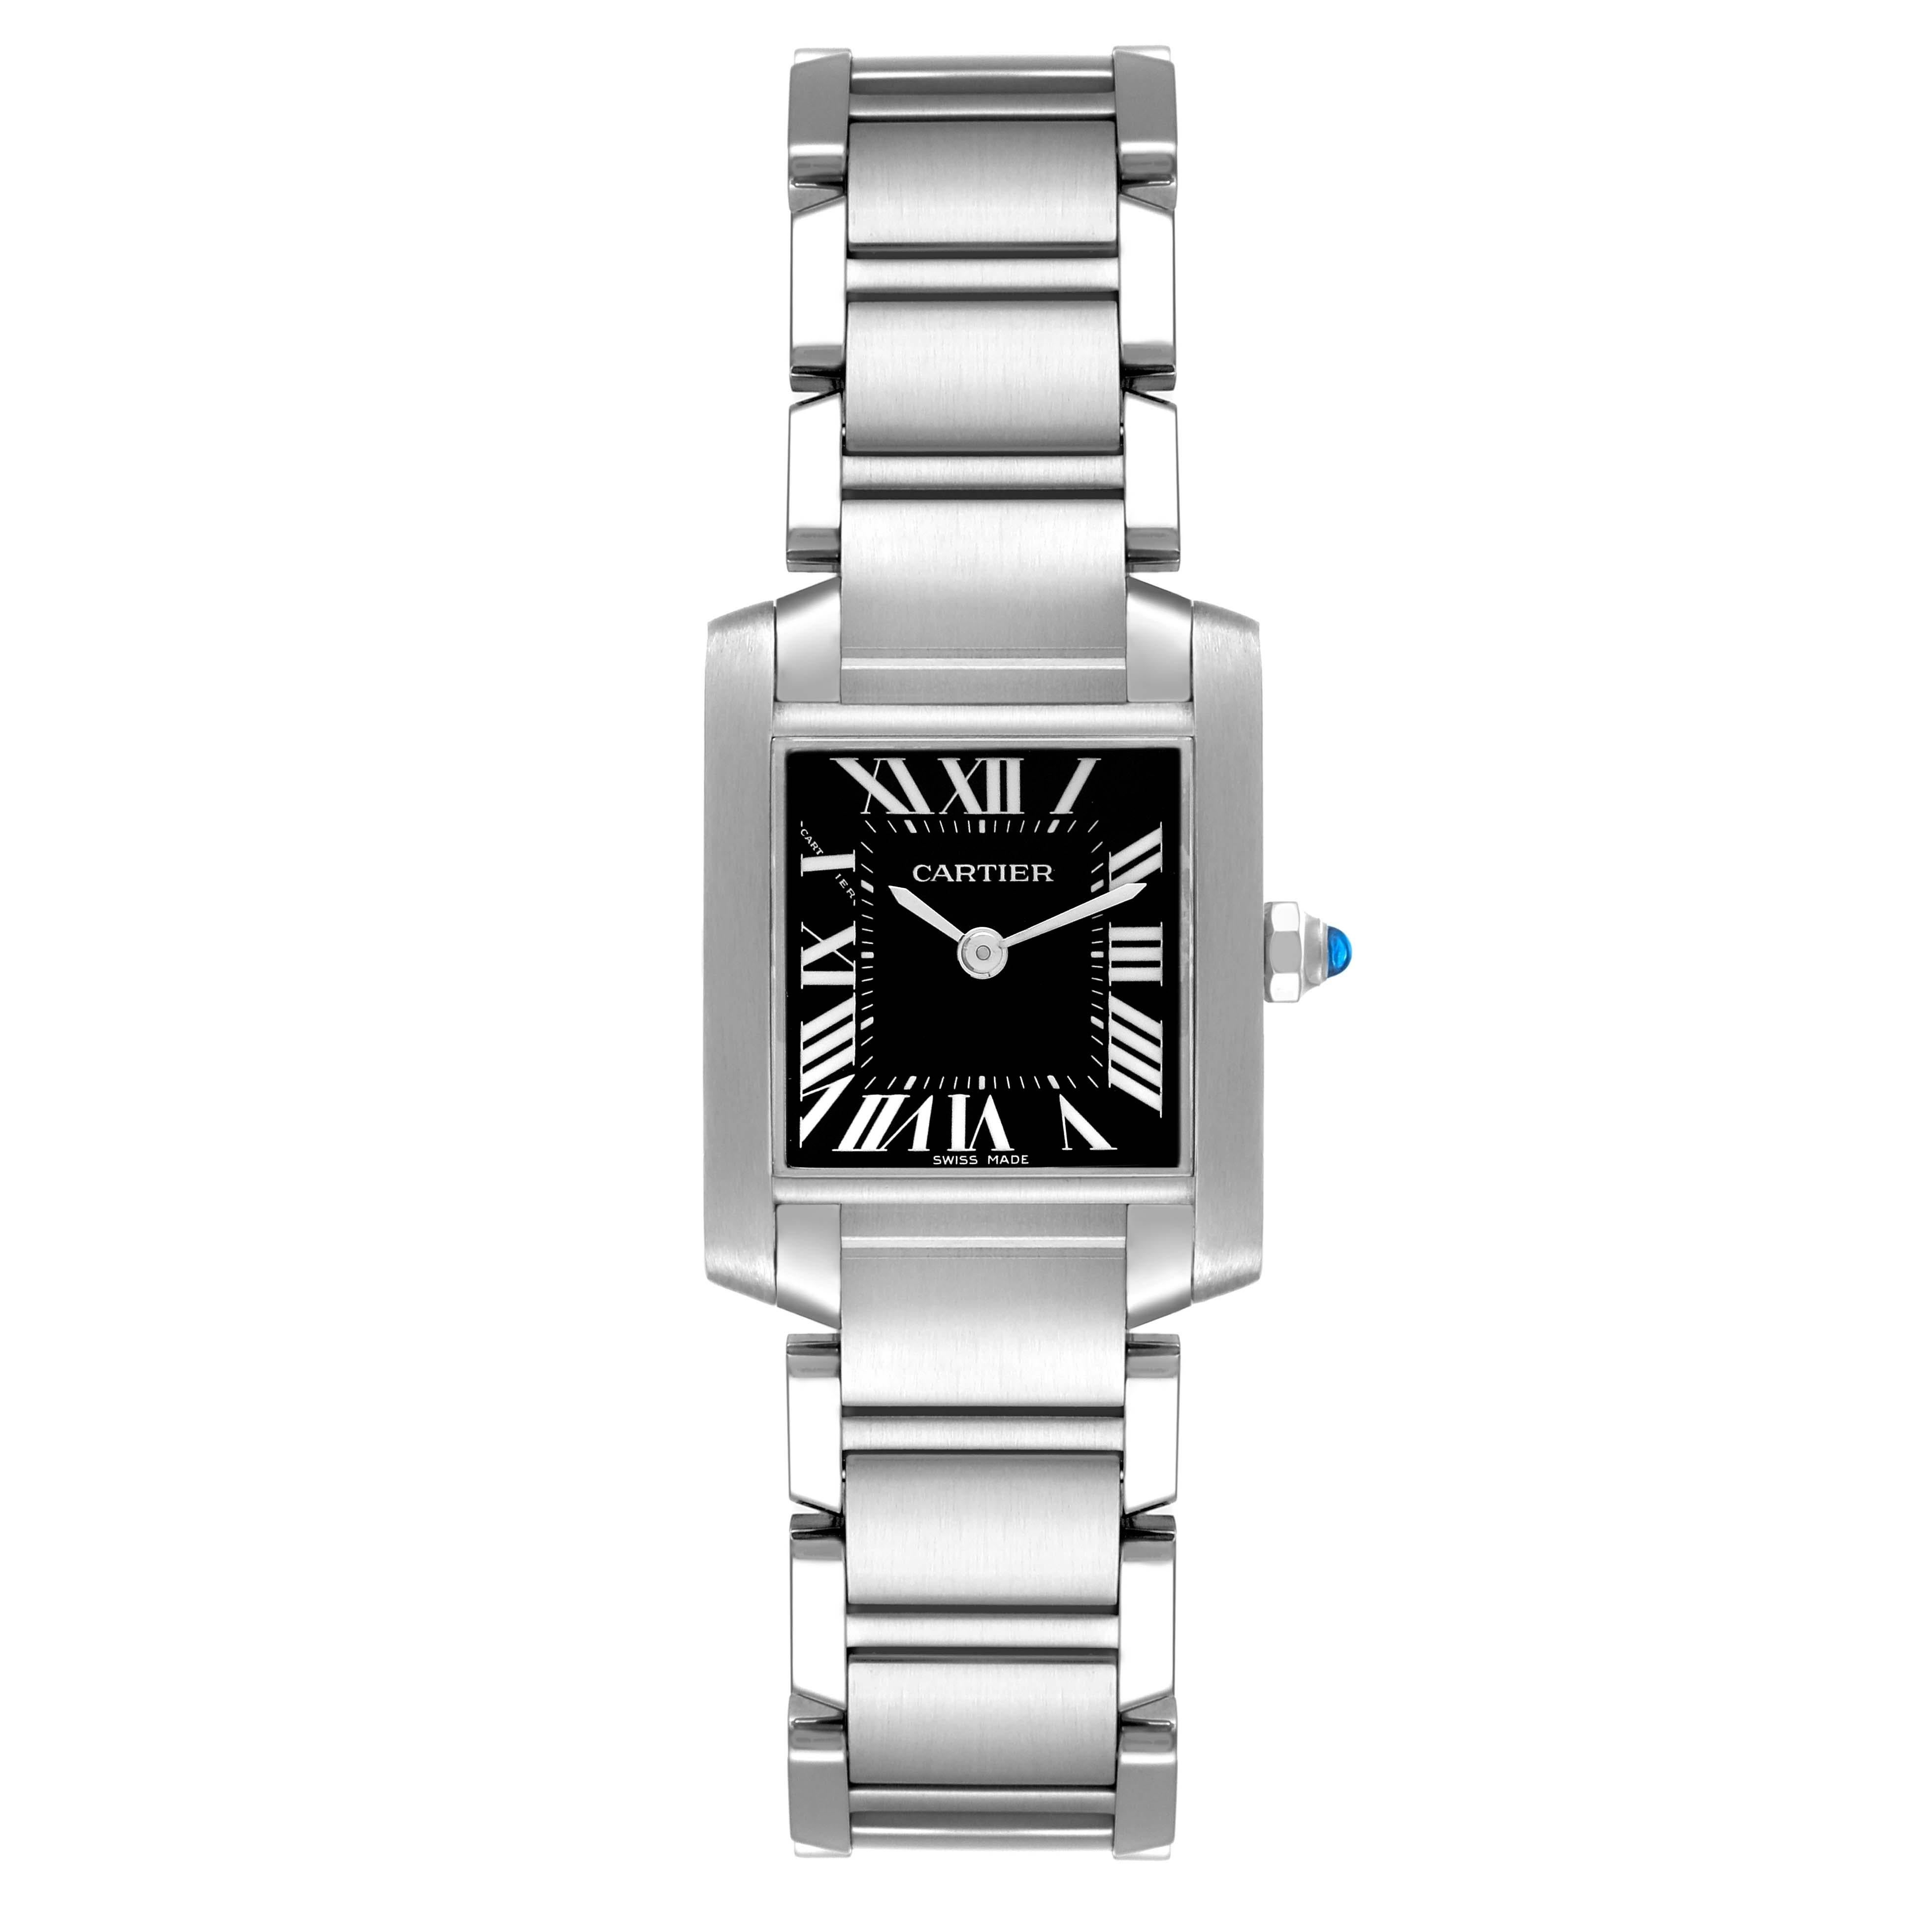 Cartier Tank Francaise Black Dial Steel Ladies Watch W51026Q3. Quartz movement. Rectangular stainless steel 20.0 x 25.0 mm case. Octagonal crown set with a blue spinel cabochon. . Scratch resistant sapphire crystal. Black dial with white radial